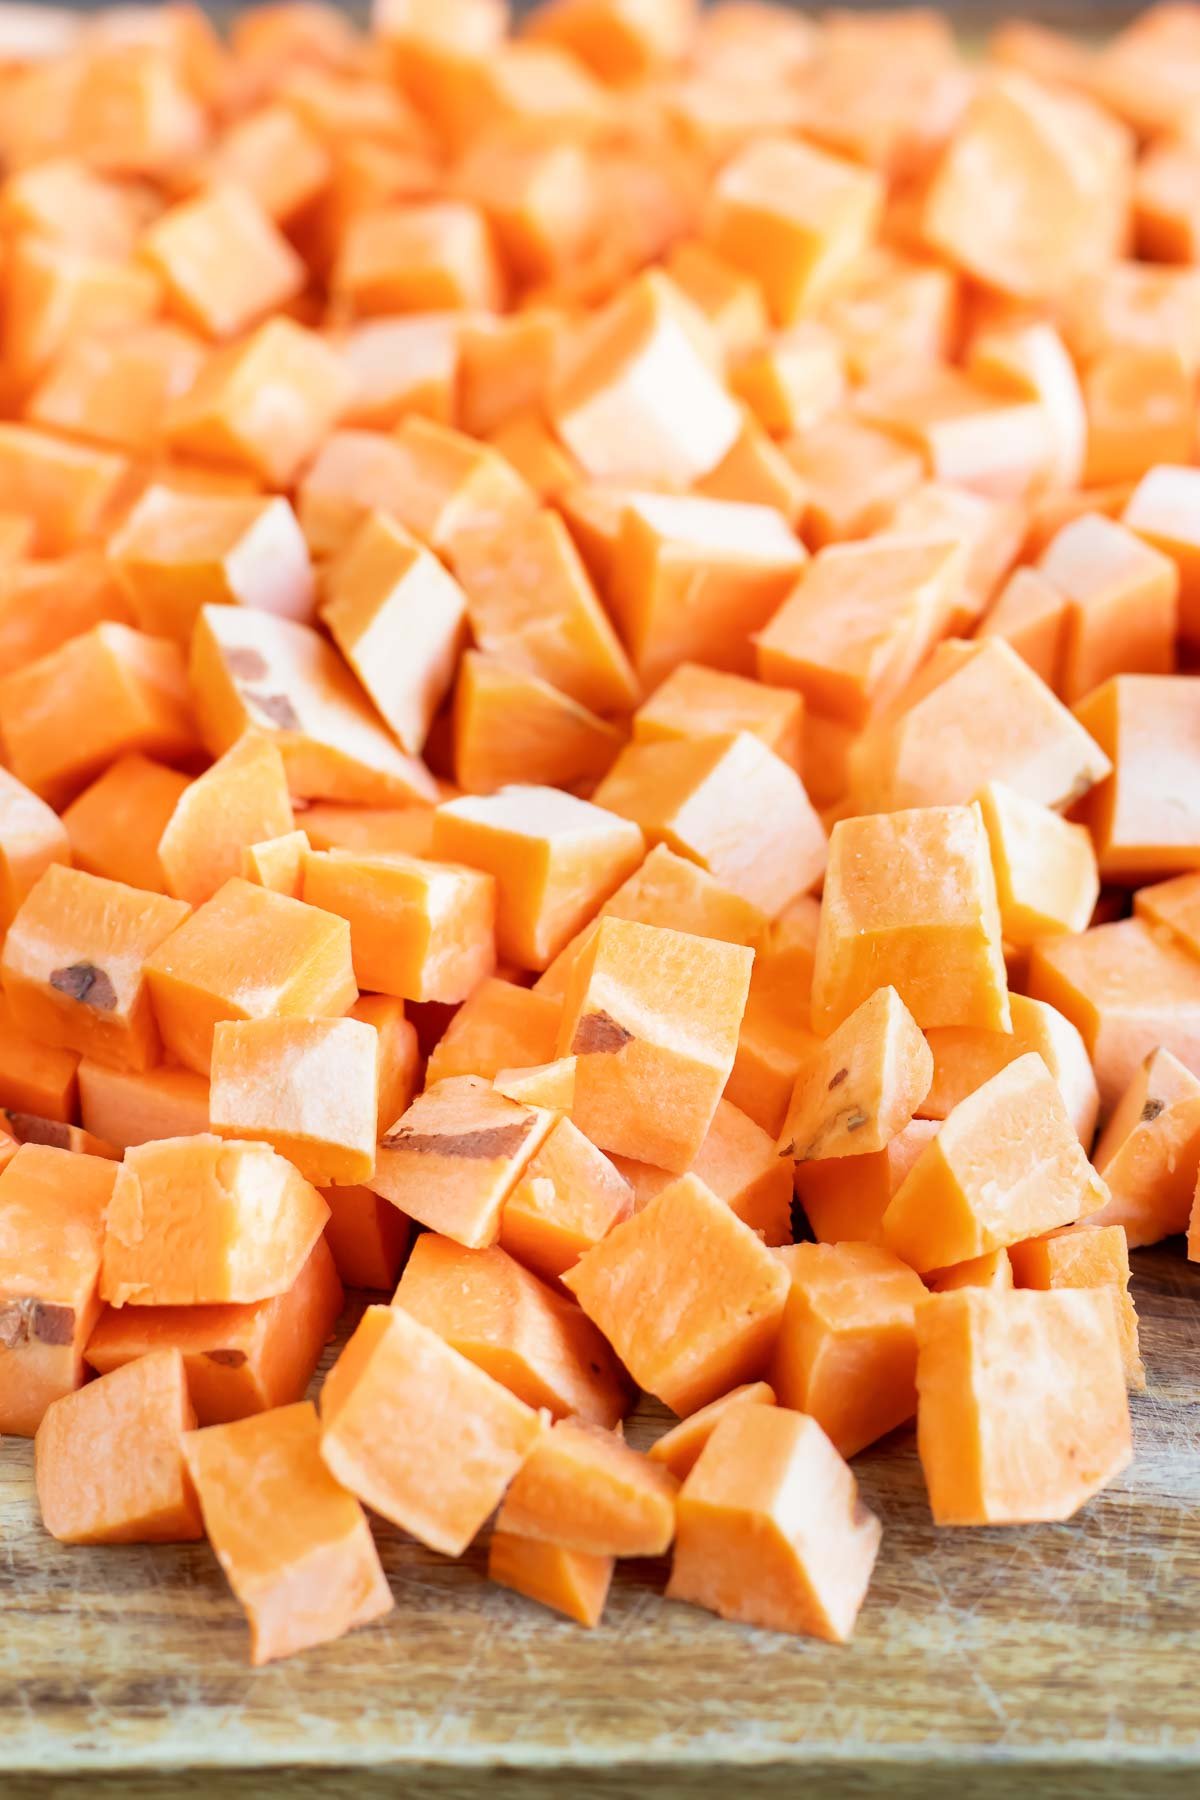 Sweet potatoes are peeled and chopped into cubes.